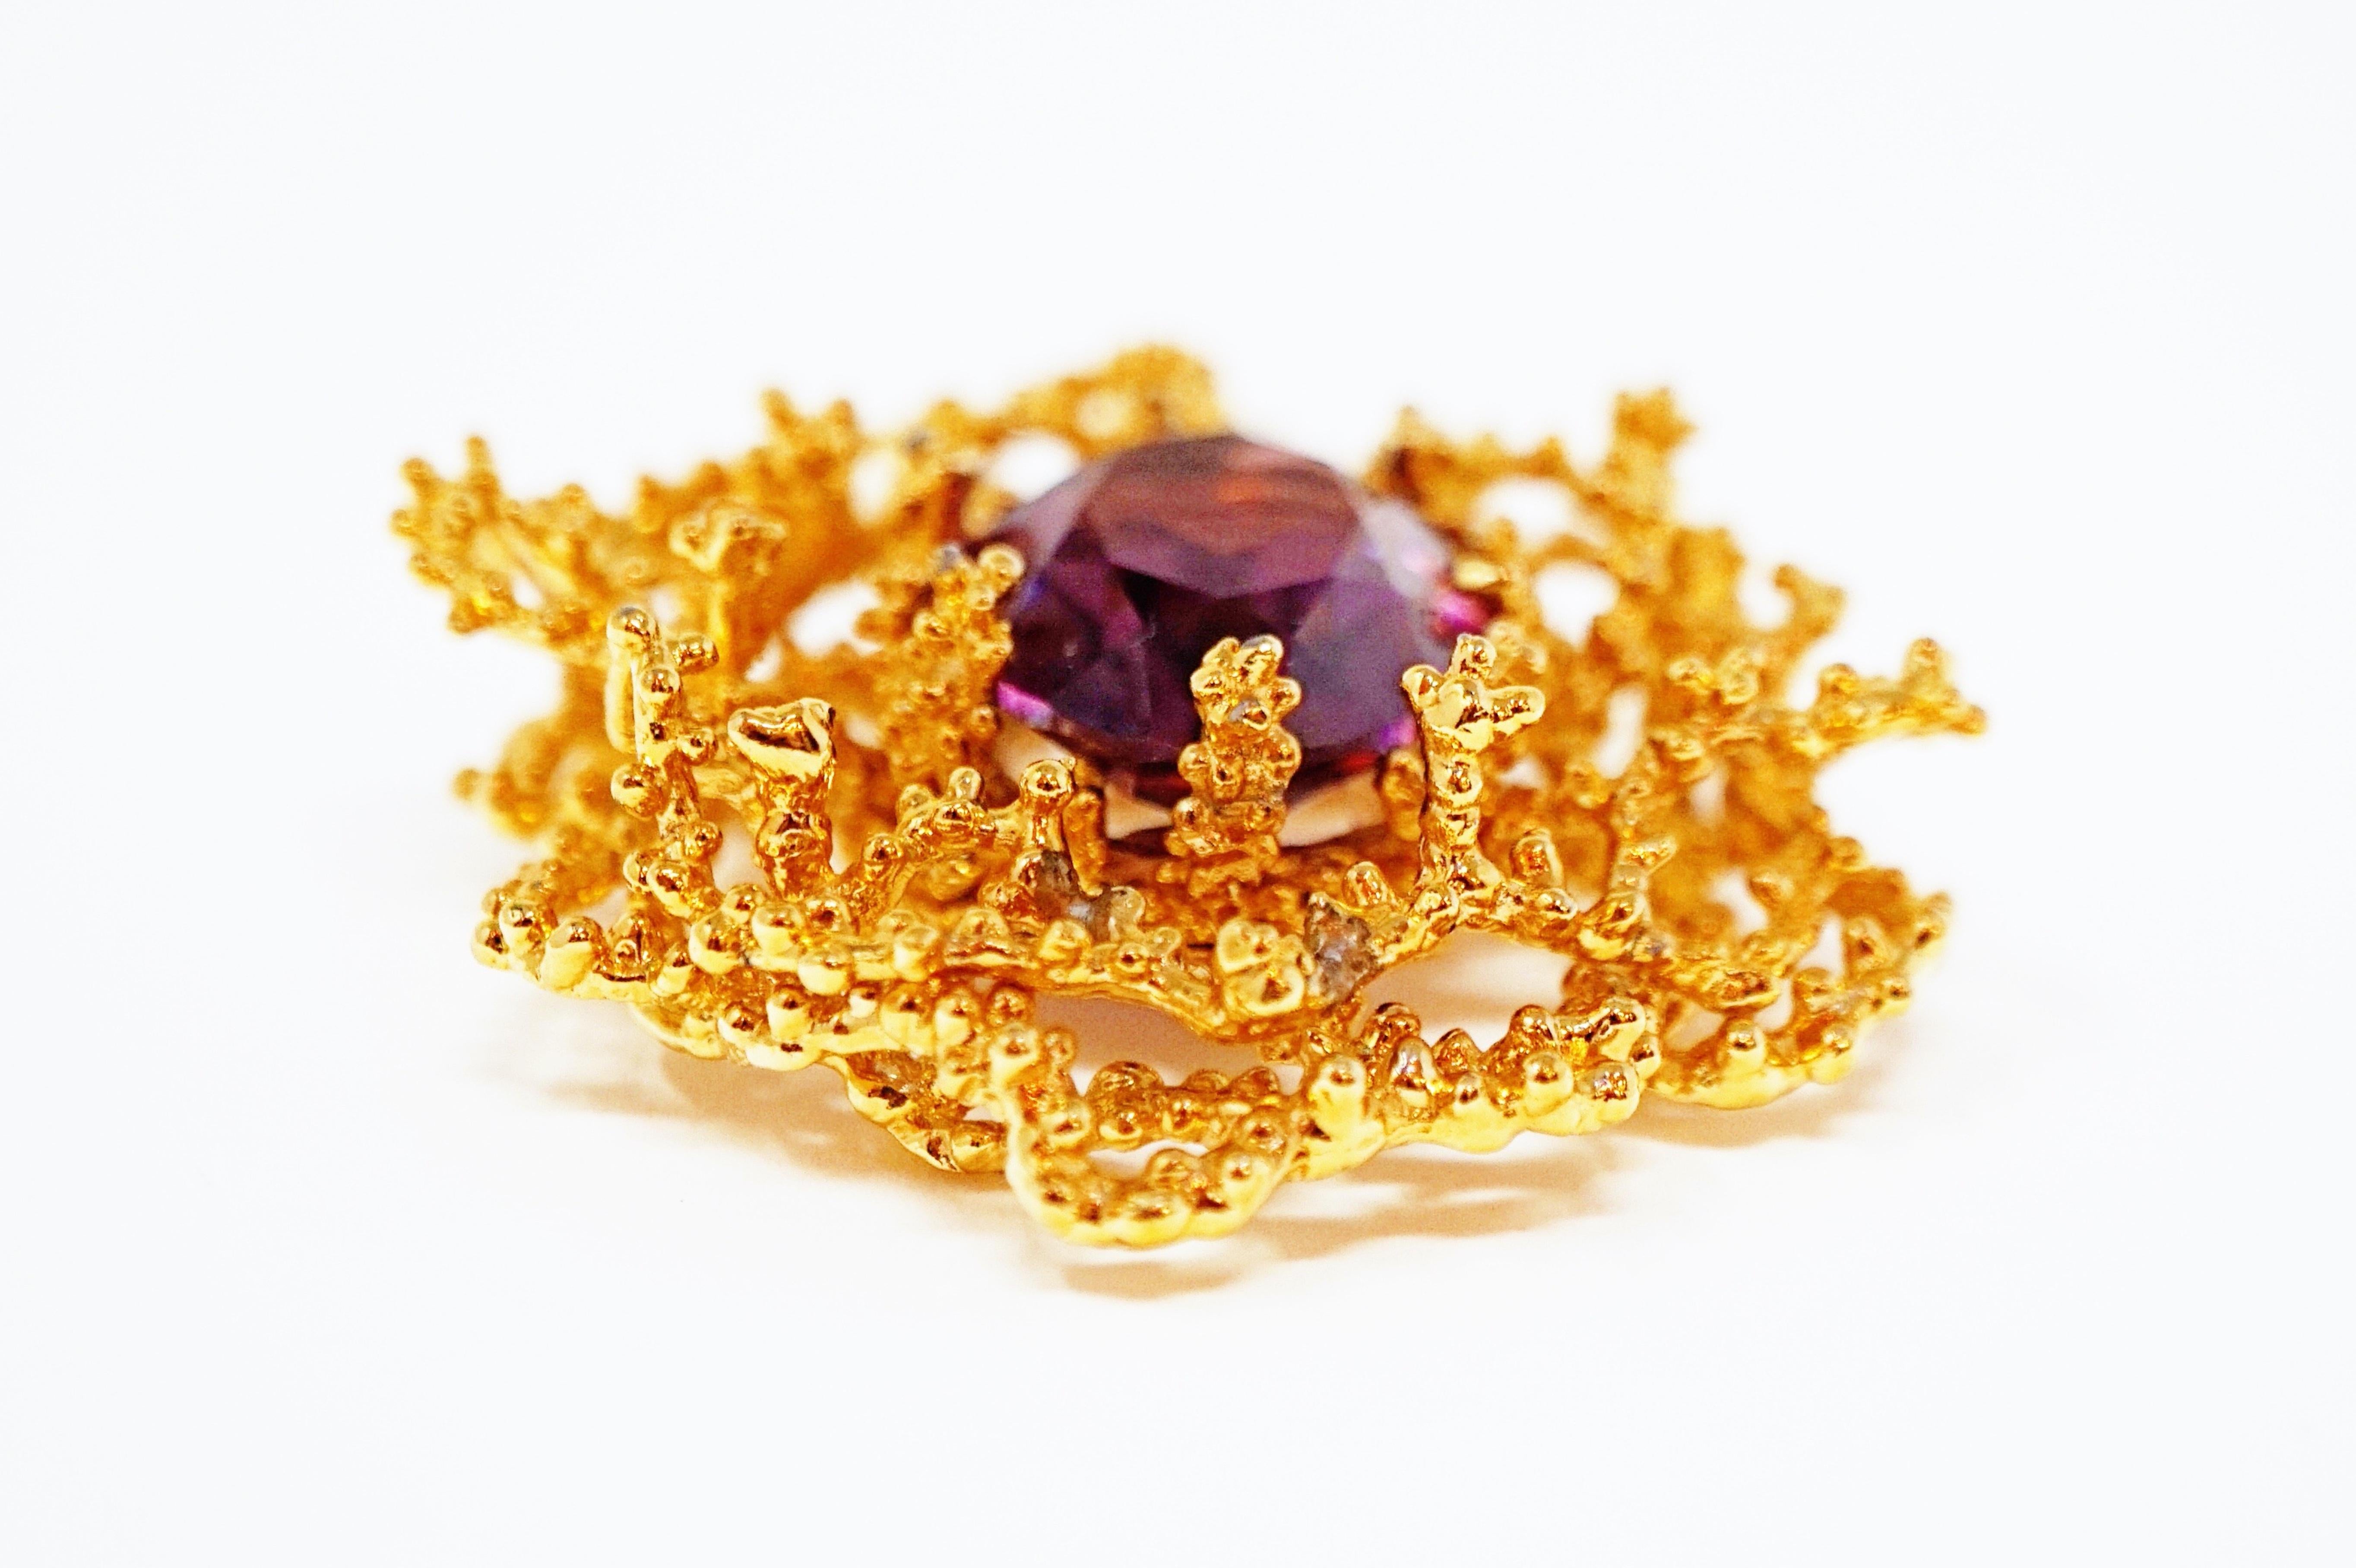 Modern Gilded Brutalist Brooch with Amethyst Crystal by Panetta, Signed, circa 1960